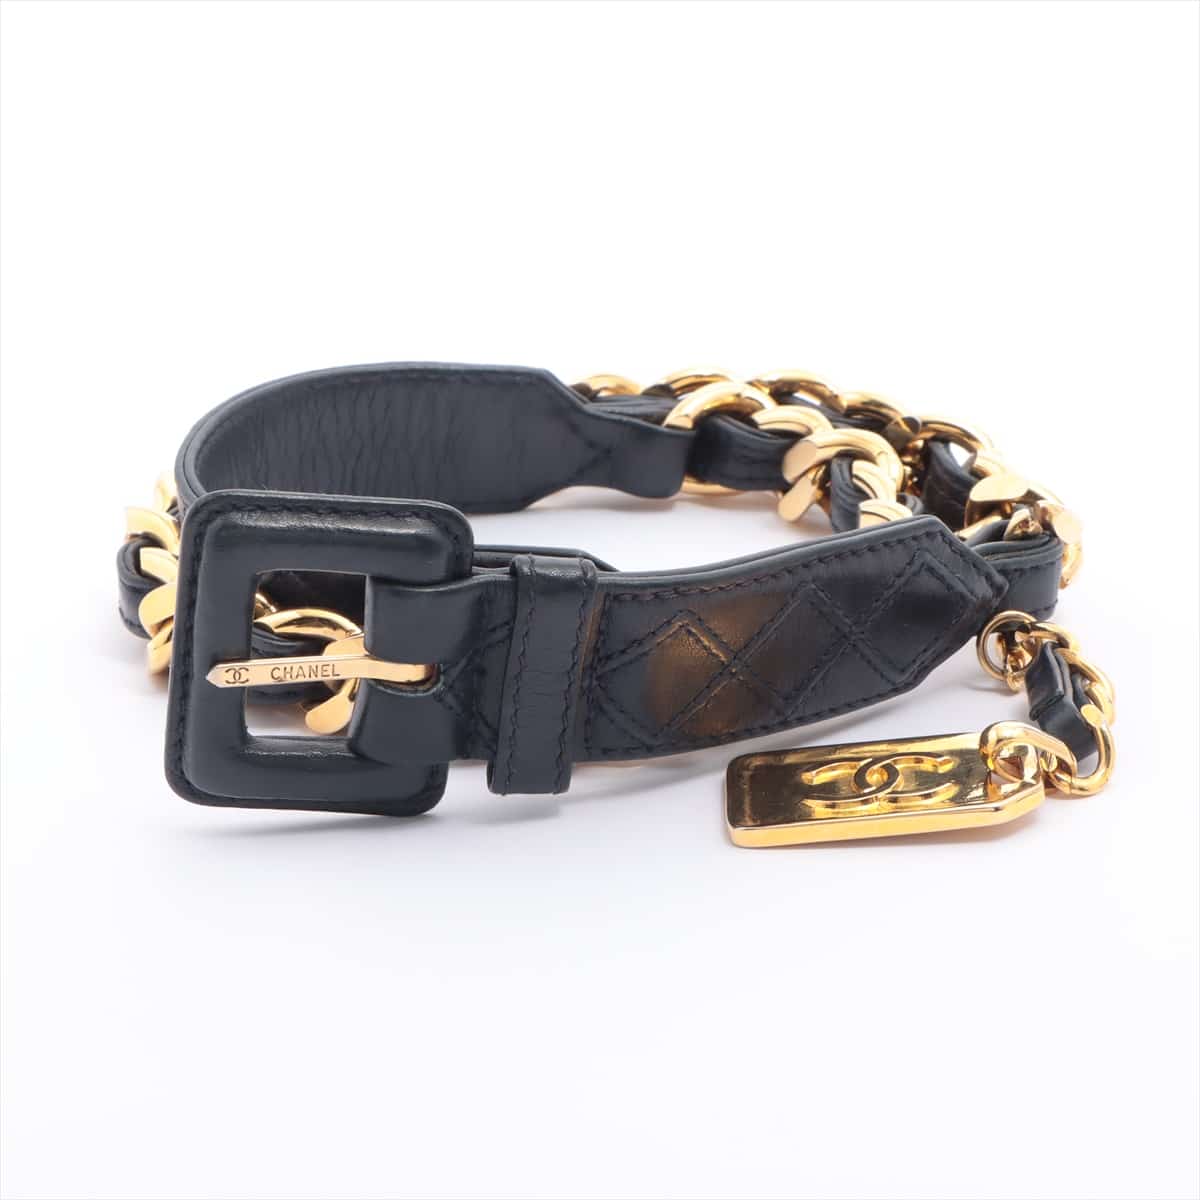 Chanel Bicolore Chain belt 26/65 GP & Leather Navy blue Cambon Plate There is rust on the metal fittings